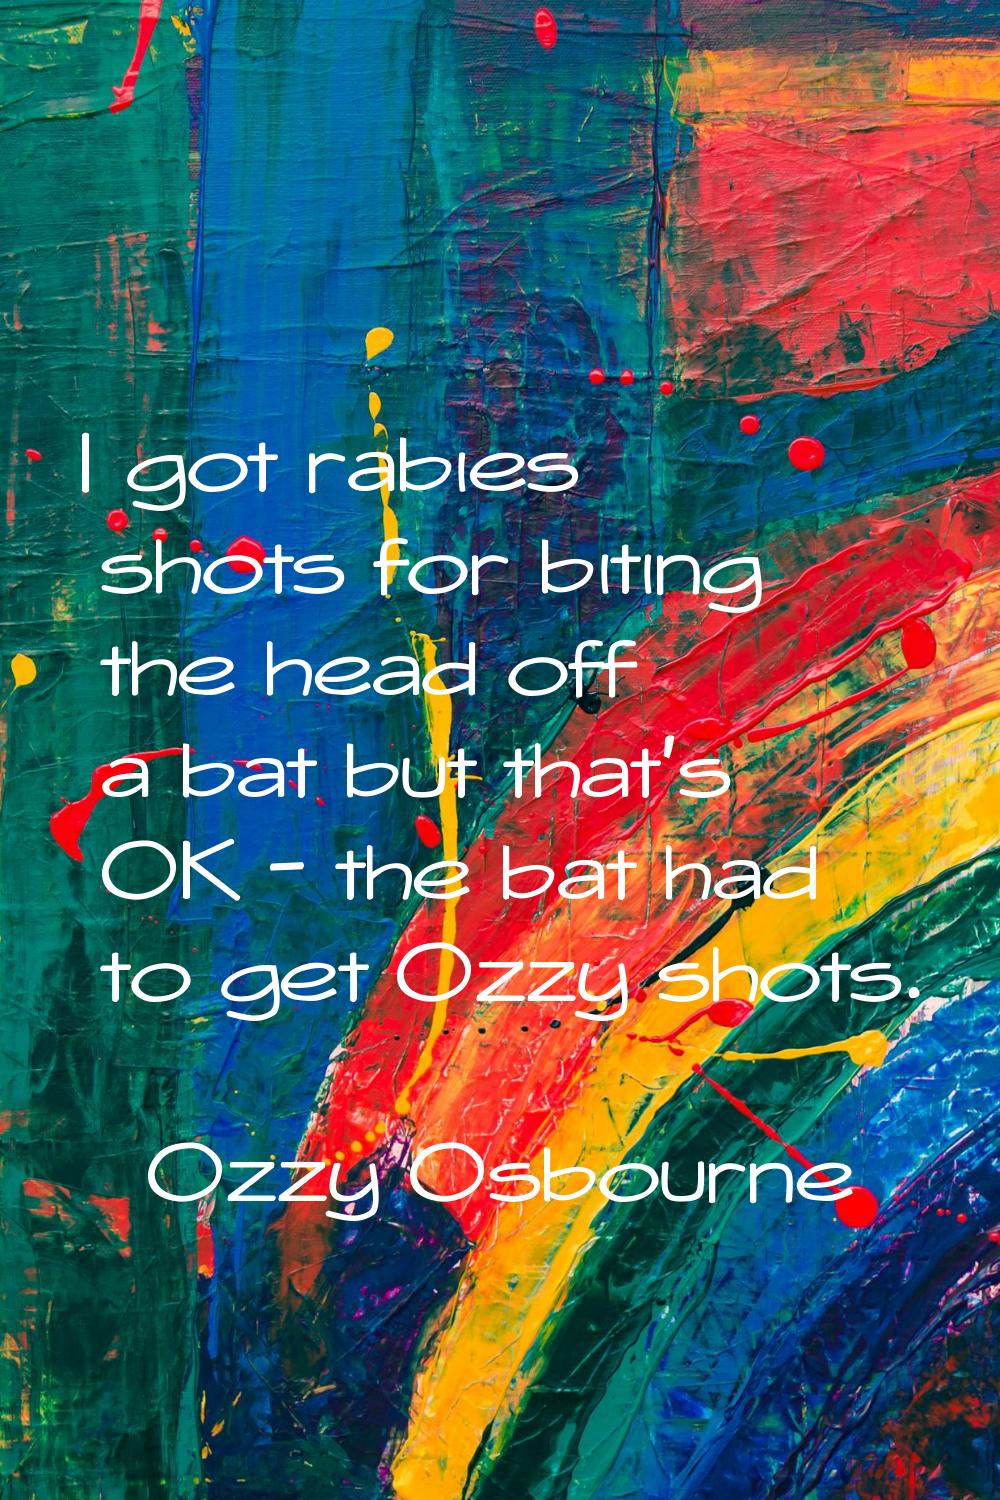 I got rabies shots for biting the head off a bat but that's OK - the bat had to get Ozzy shots.